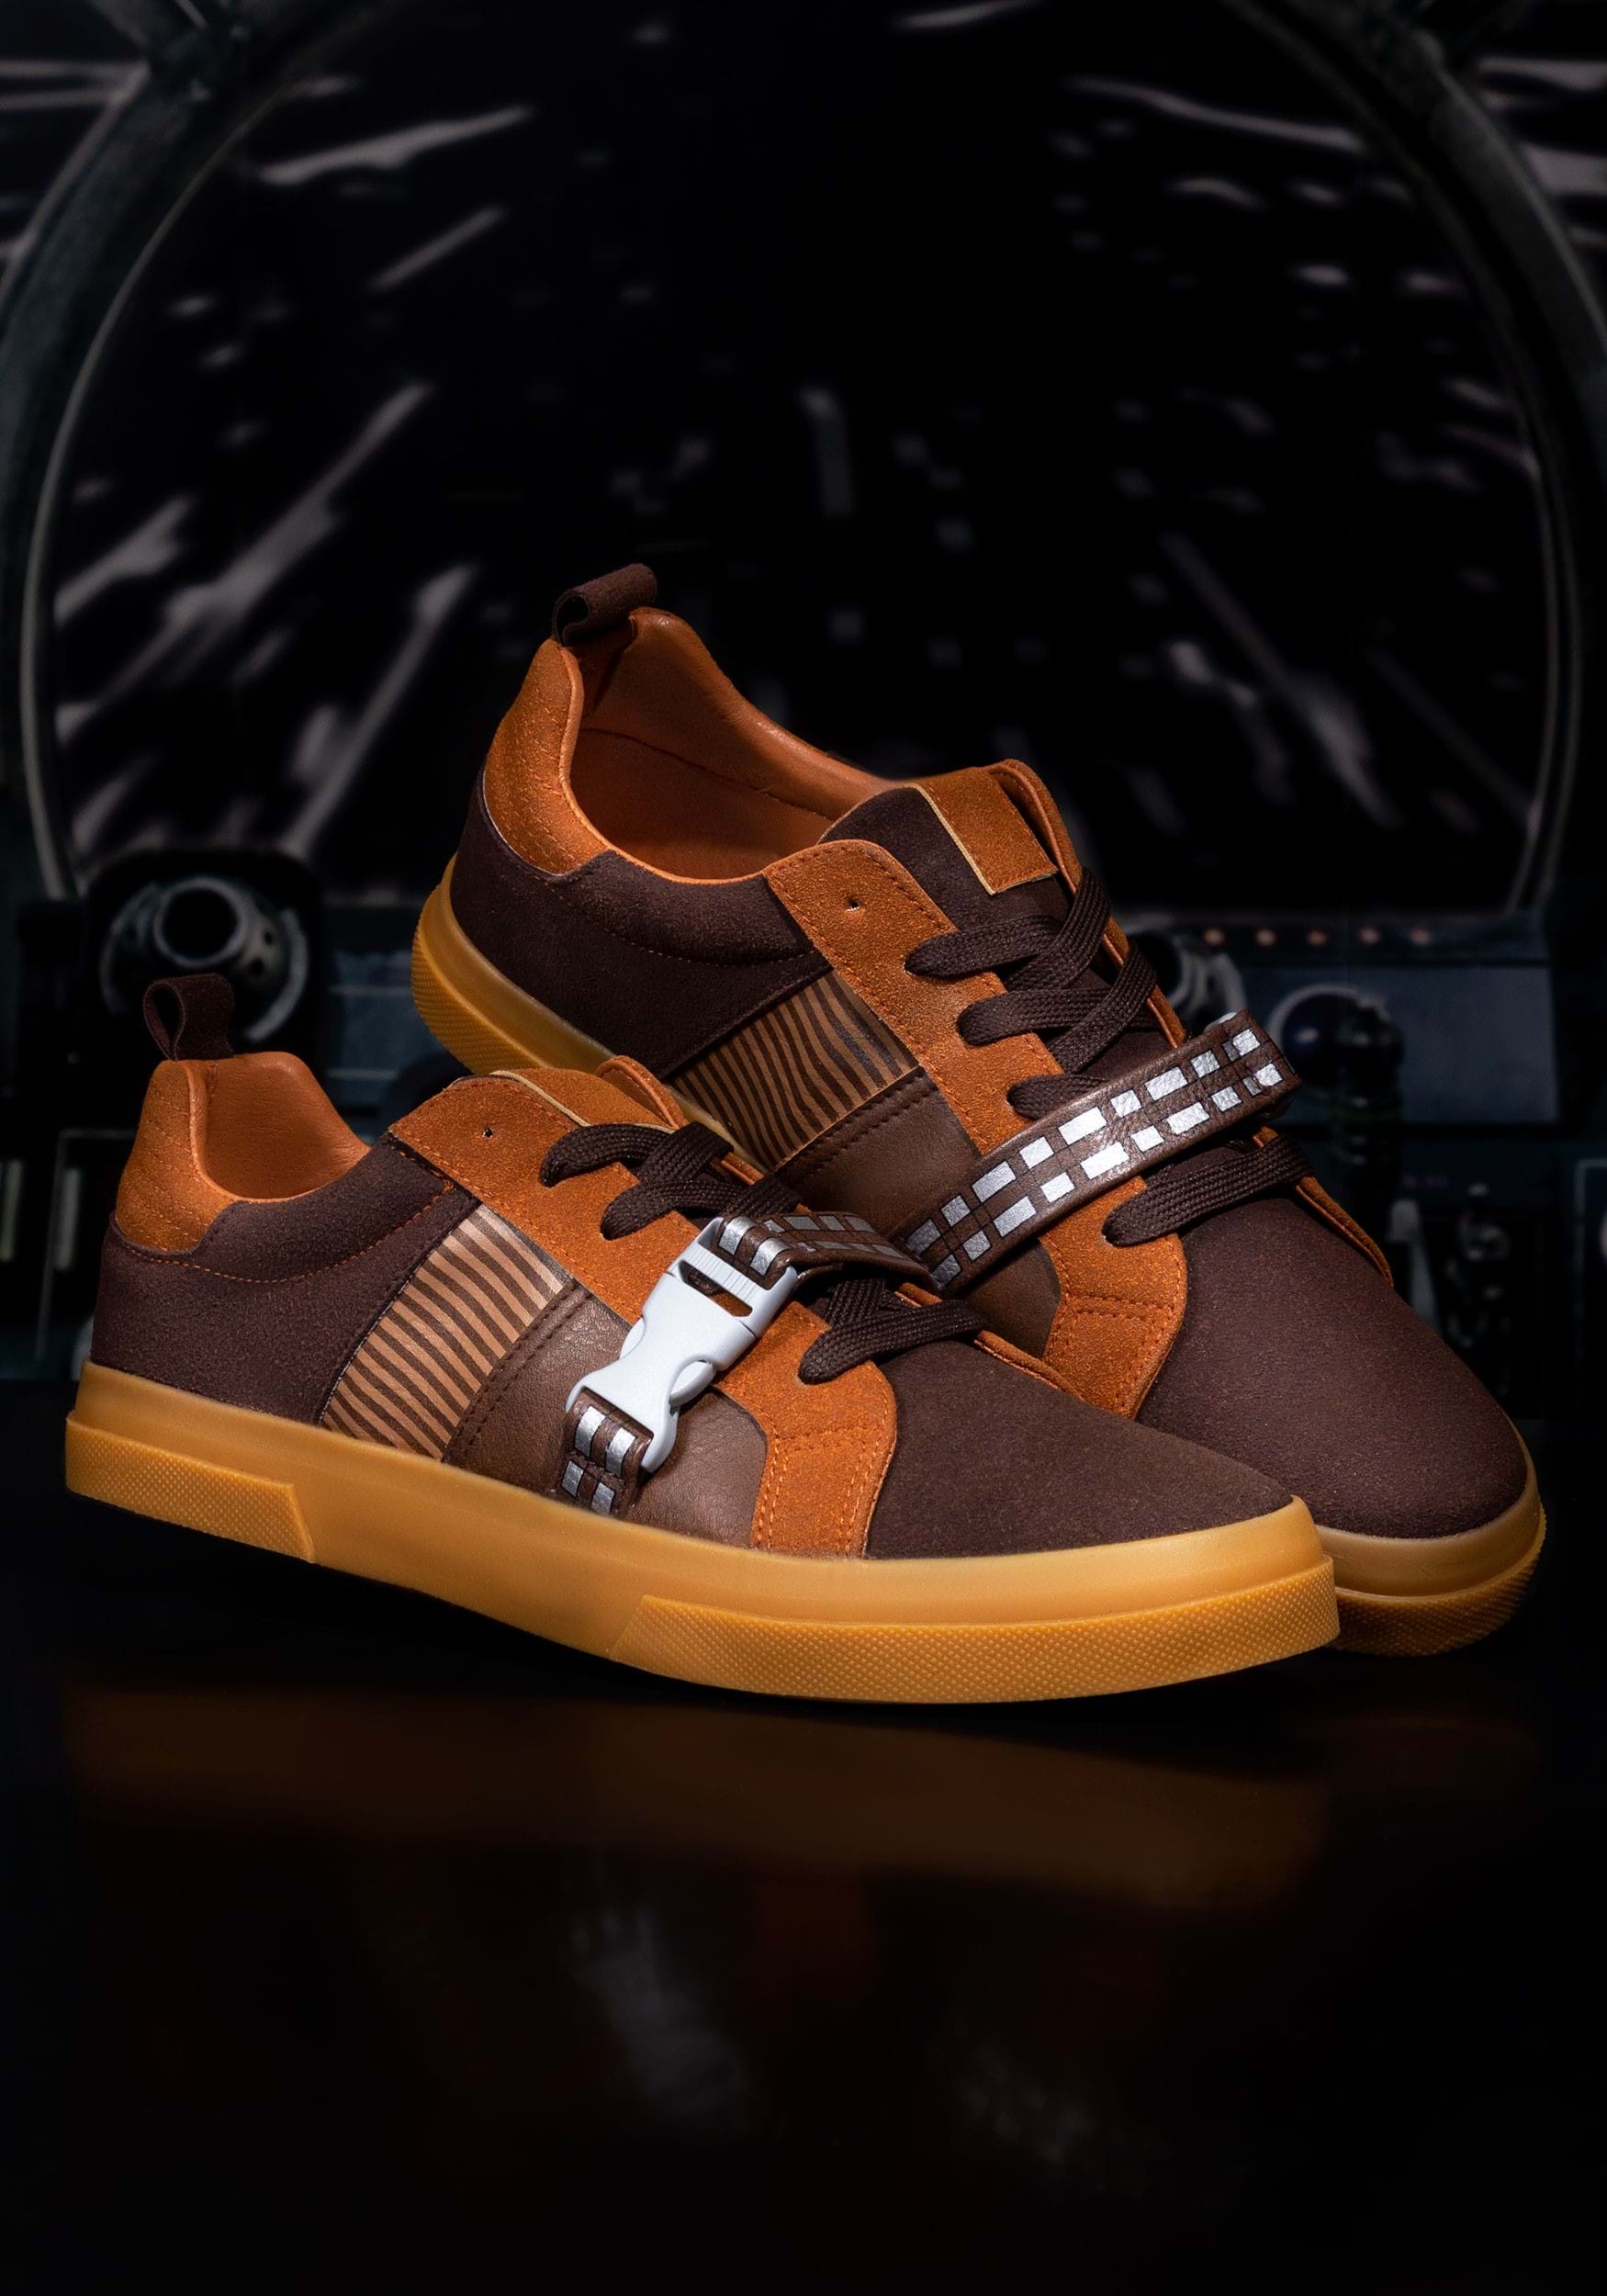 Star Wars Chewbacca Low-Top Shoes